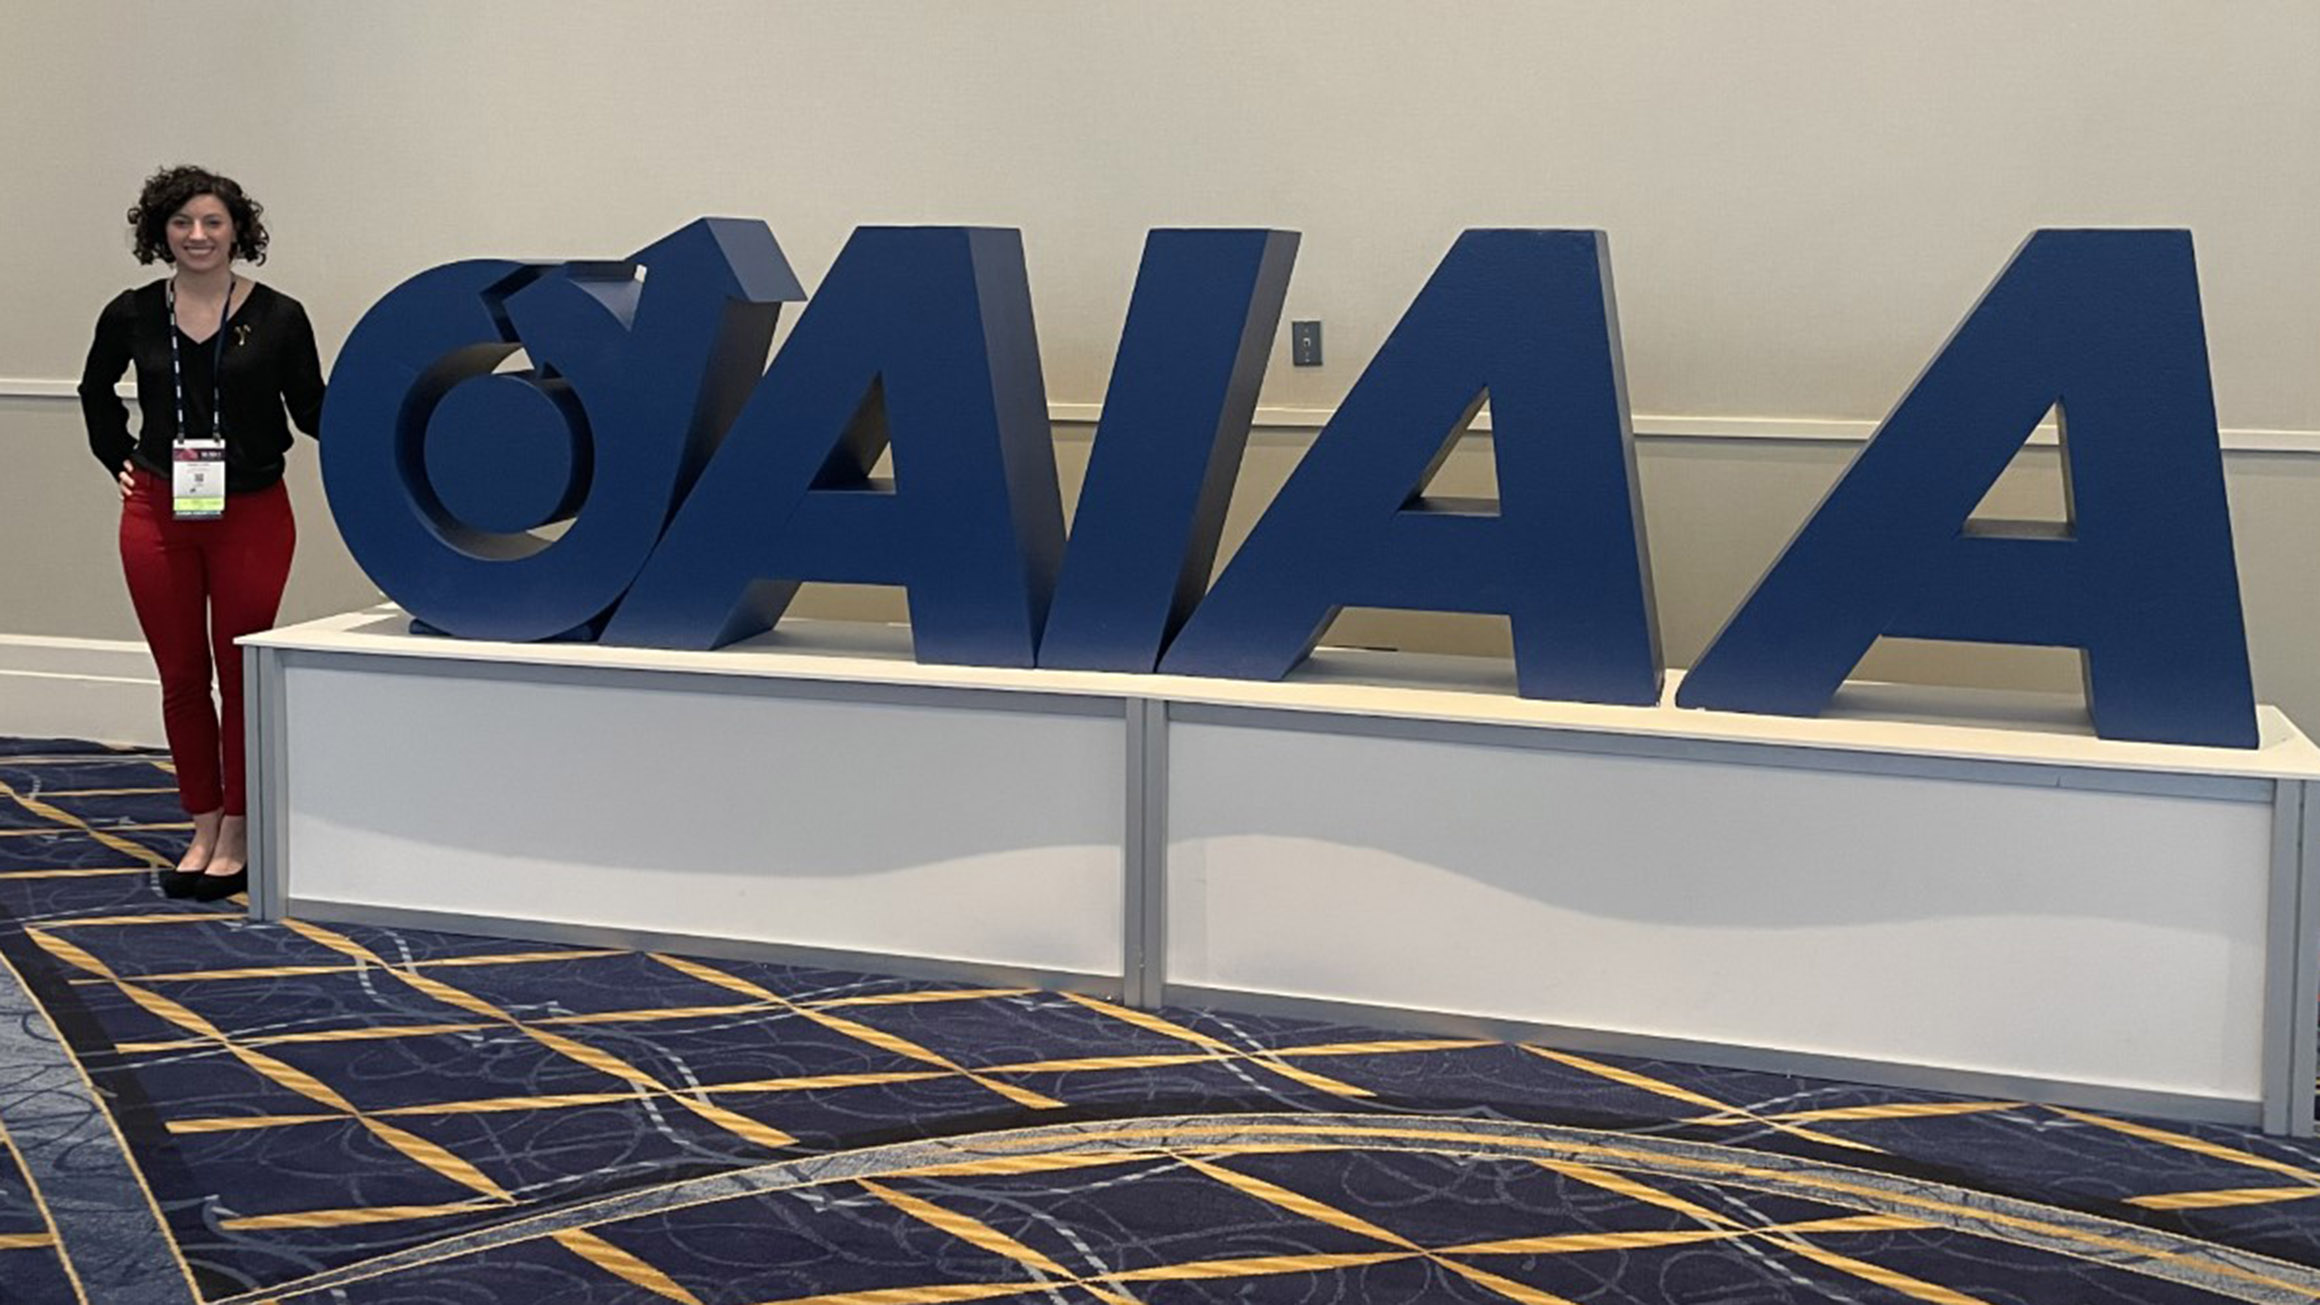 Renee Dorer stands next to a blocks spelling out the acronym AIAA in a conference room